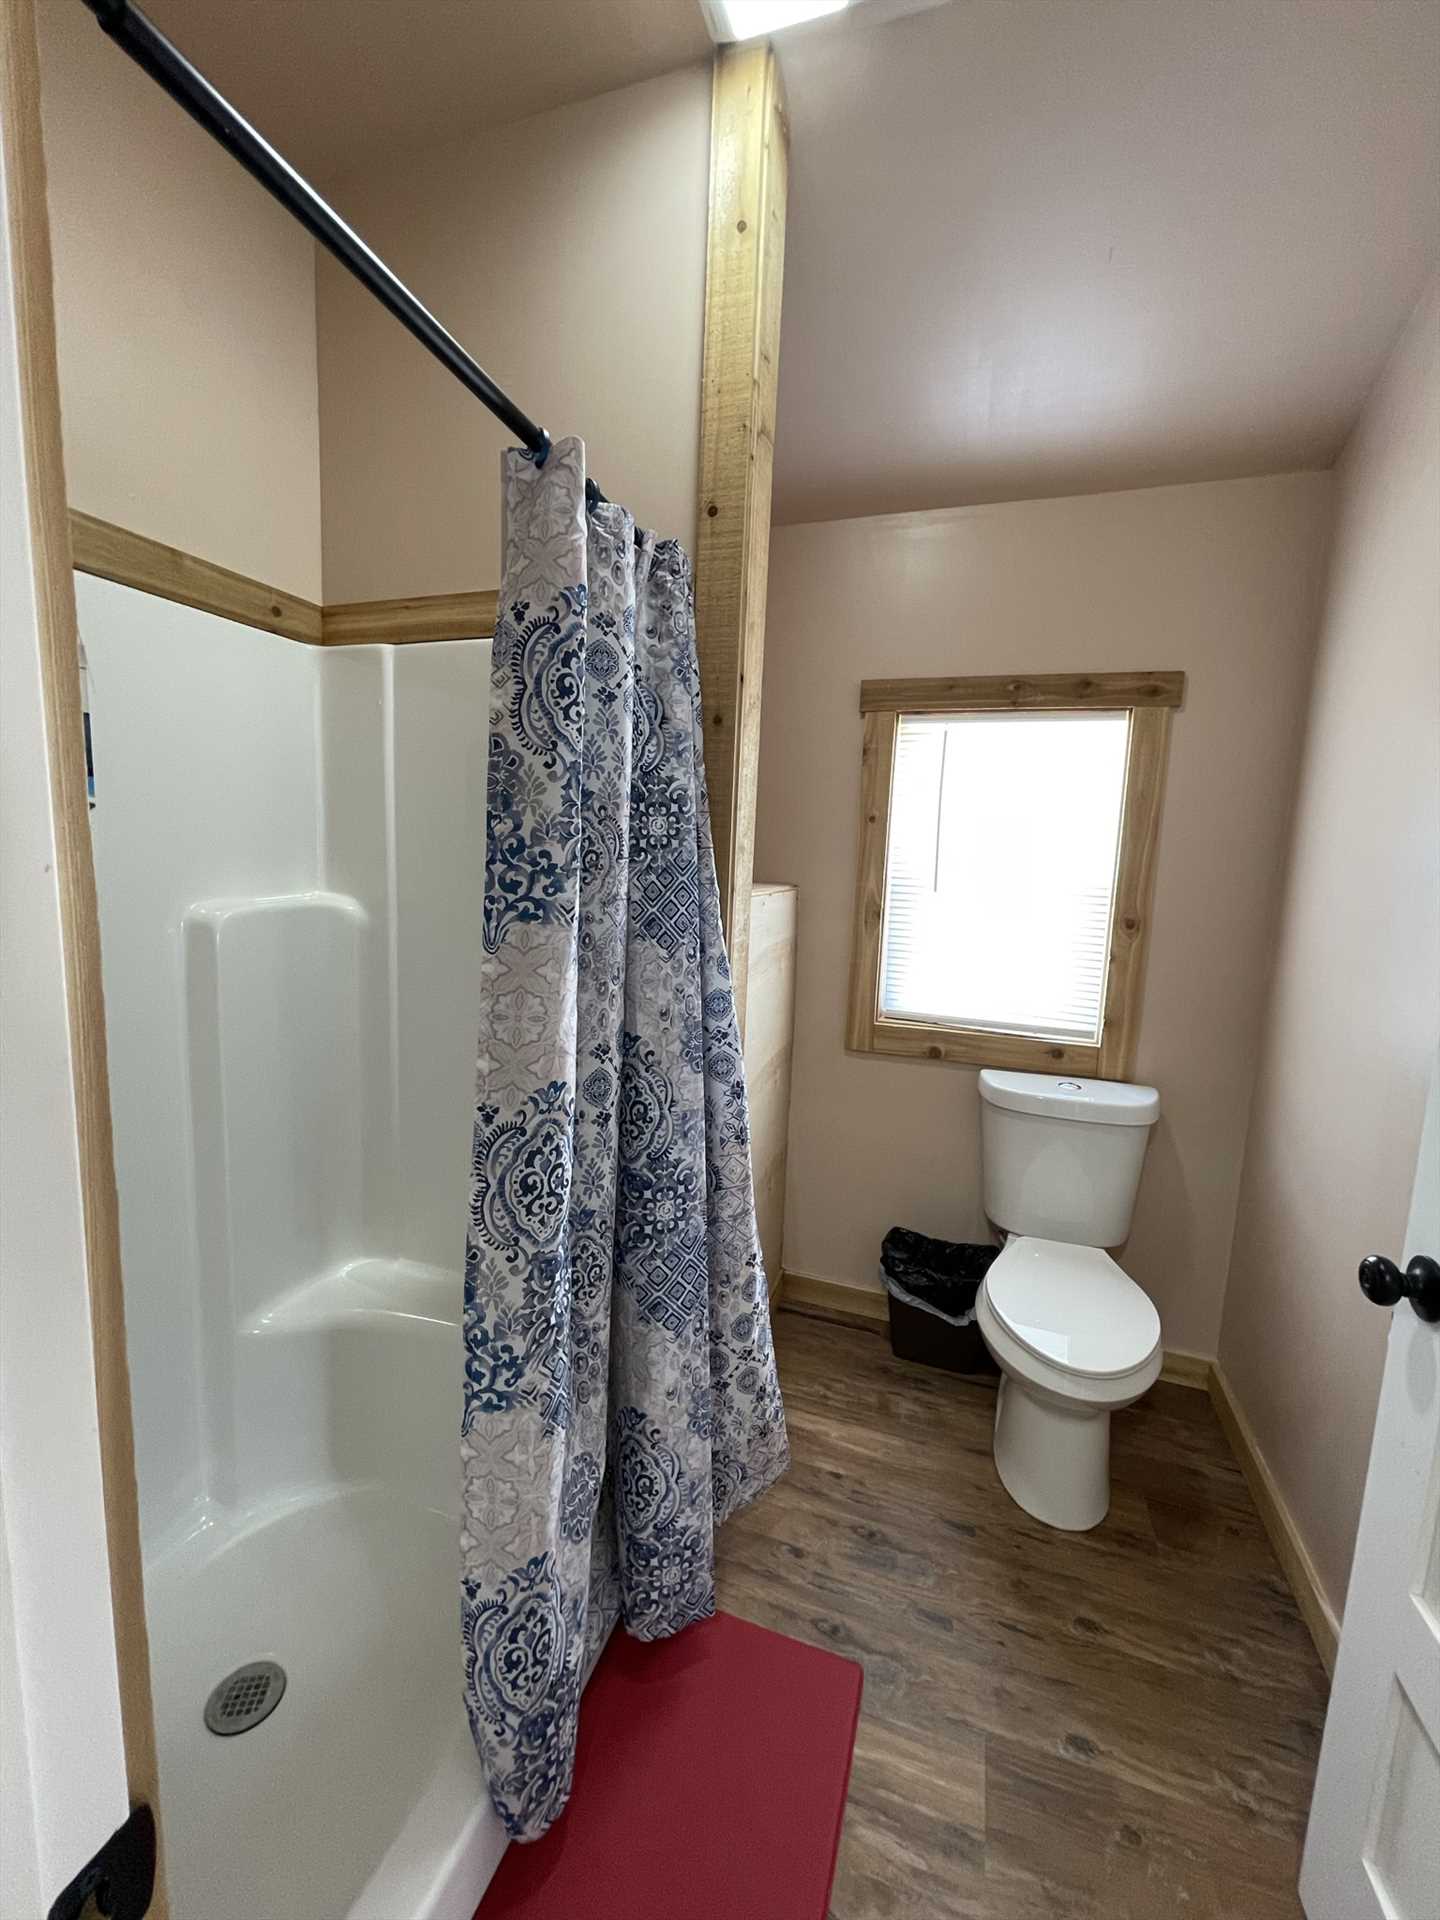                                                 The full bath here includes a roomy shower, and cleanup is made easy with complimentary bath linens, too!